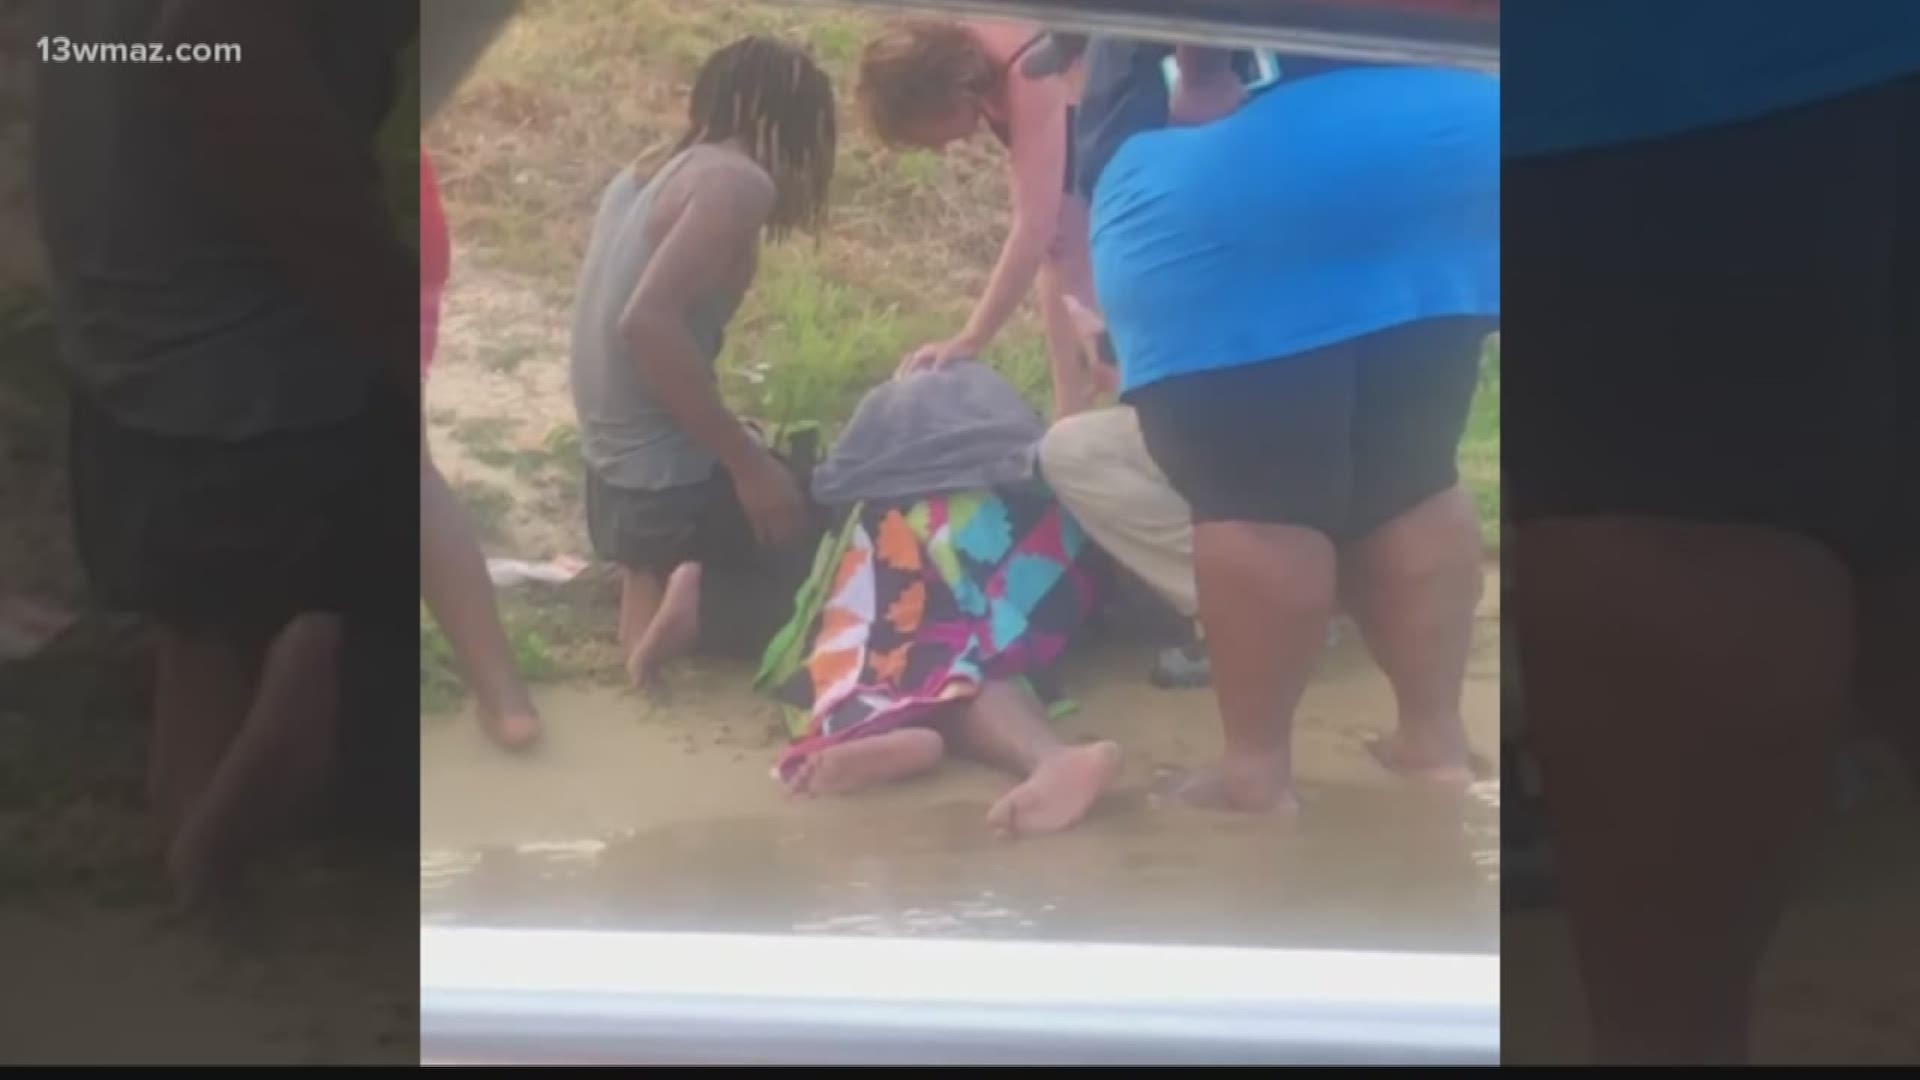 Macon nearly saw its third drowning victim in less than a week, but a good Samaritan stepped in to help save a man's life. The woman spotted a man drowning on Lake Tobesofkee just in time.